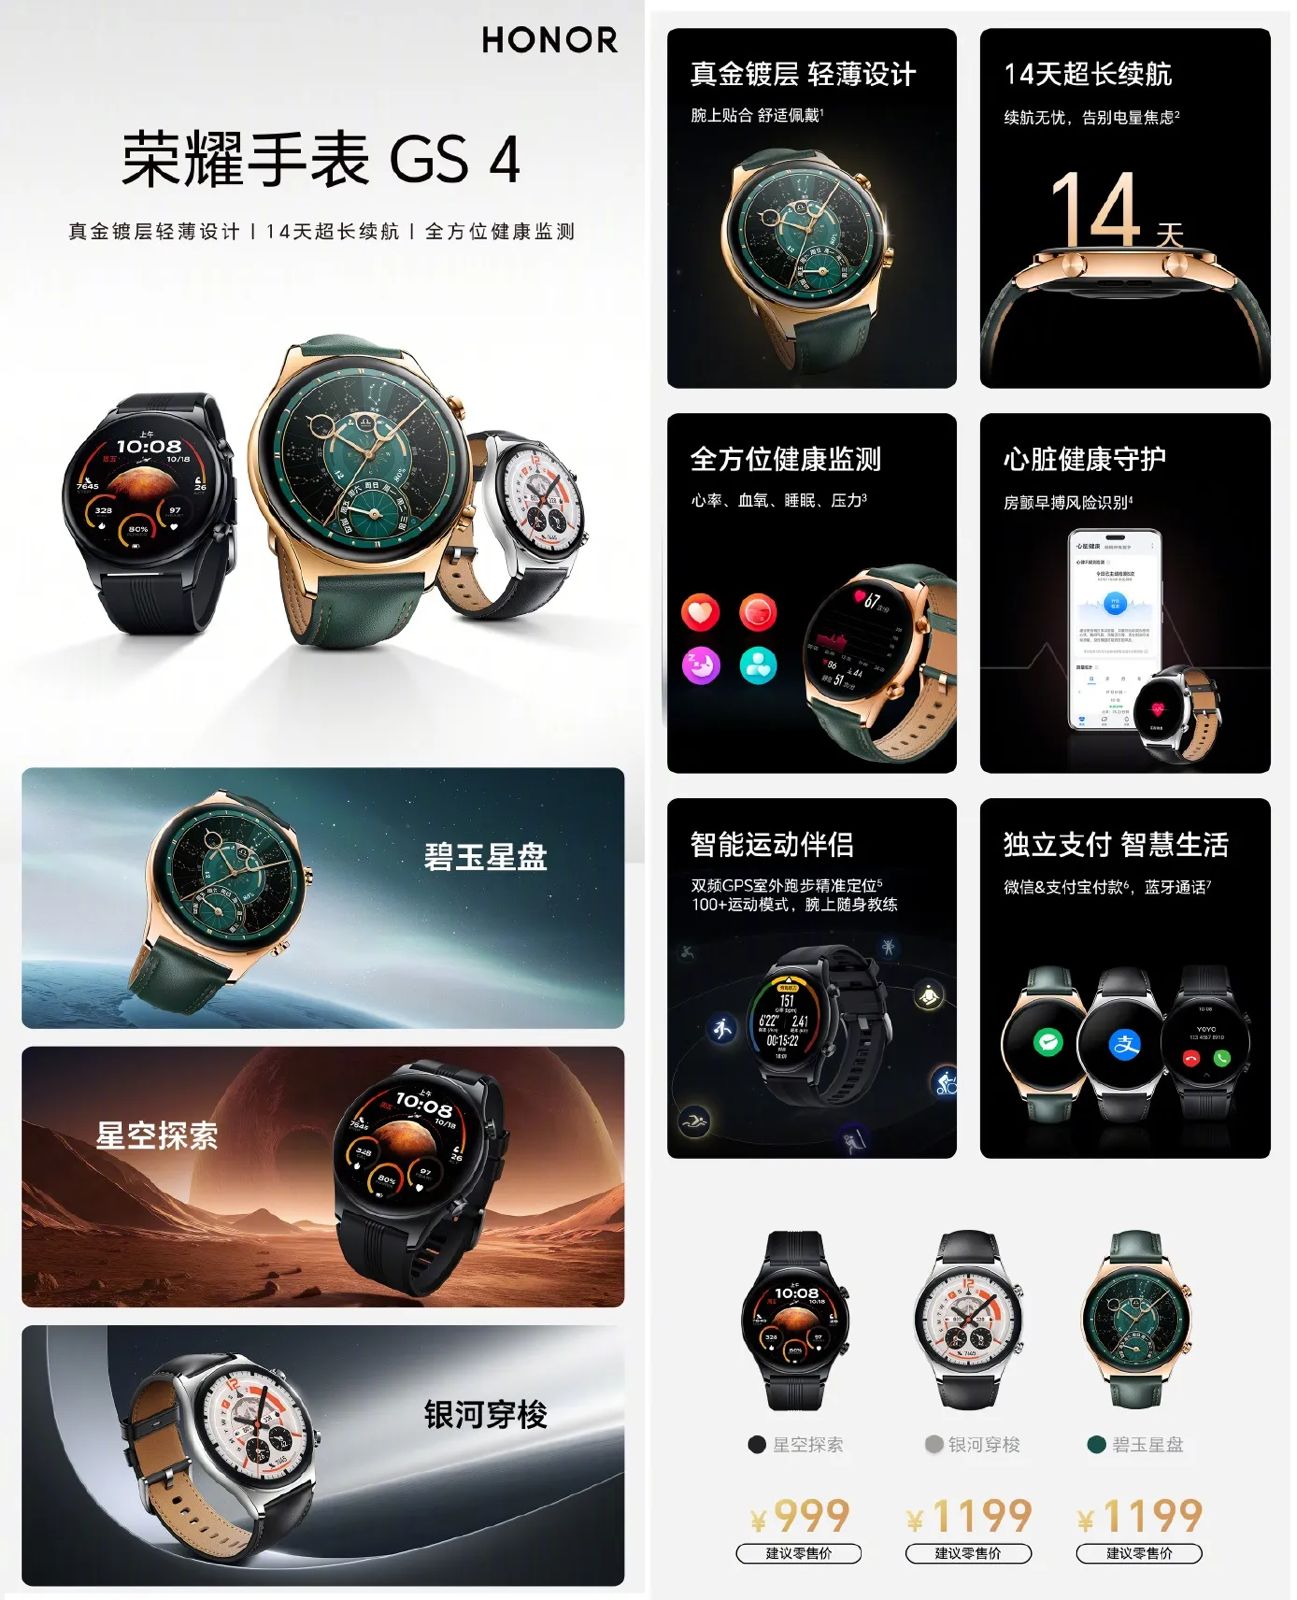 Quick specifications: HONOR Watch GS 4